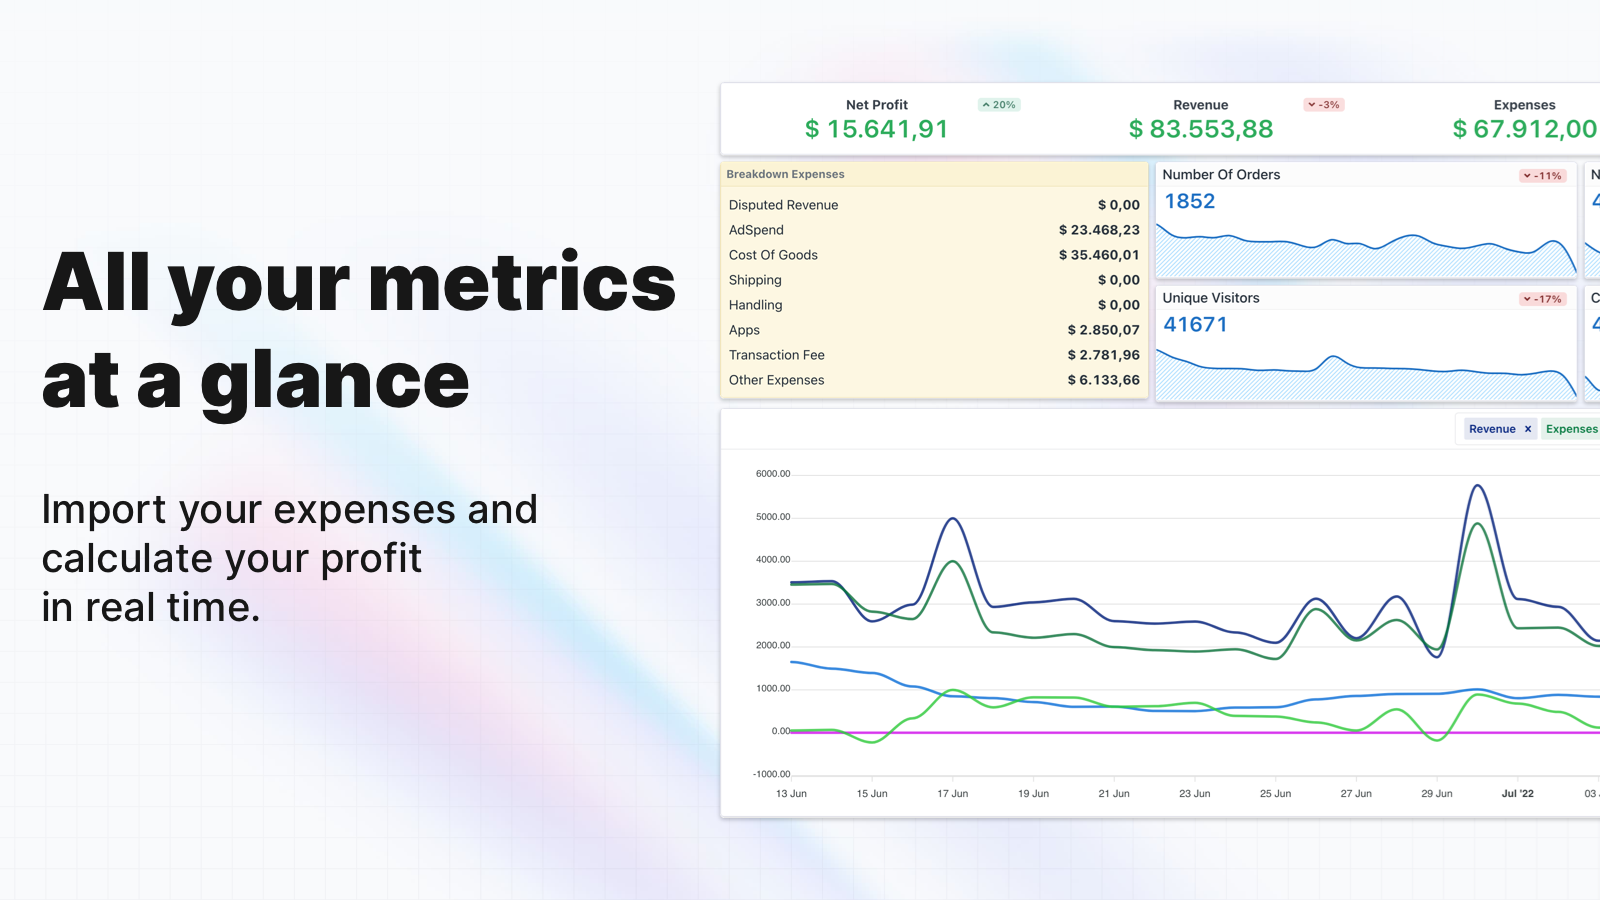 All your metrics at a glance